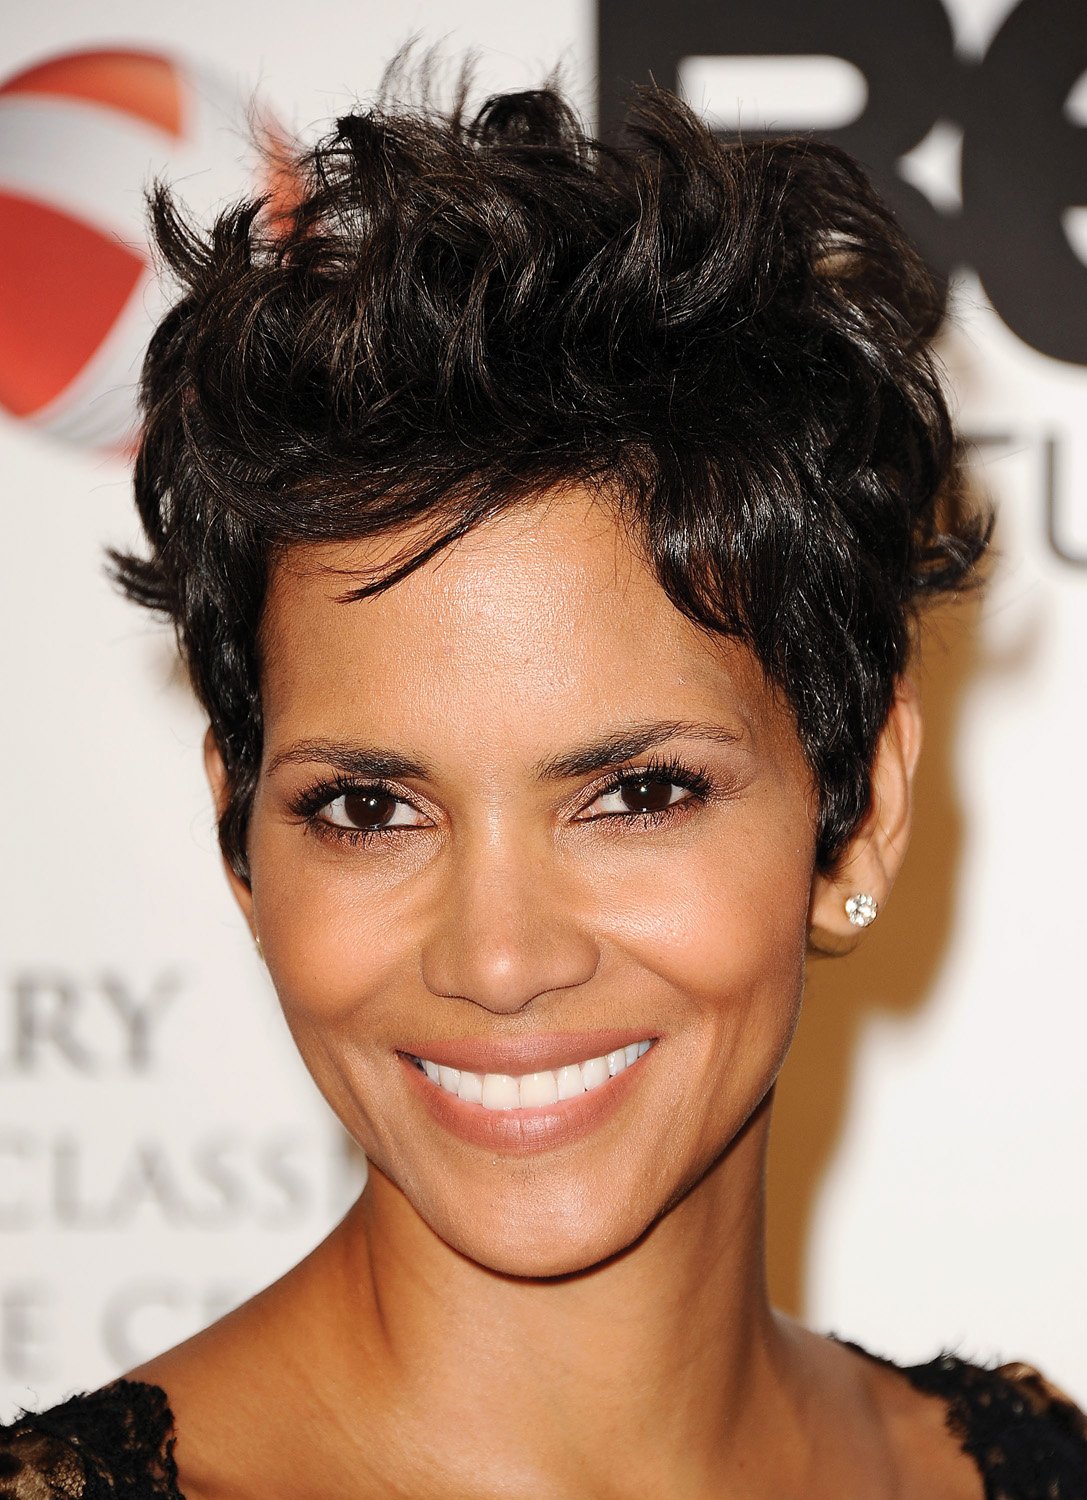 Halle Berry: The Bond bombshell dishes on beauty, aging and red carpet fun.